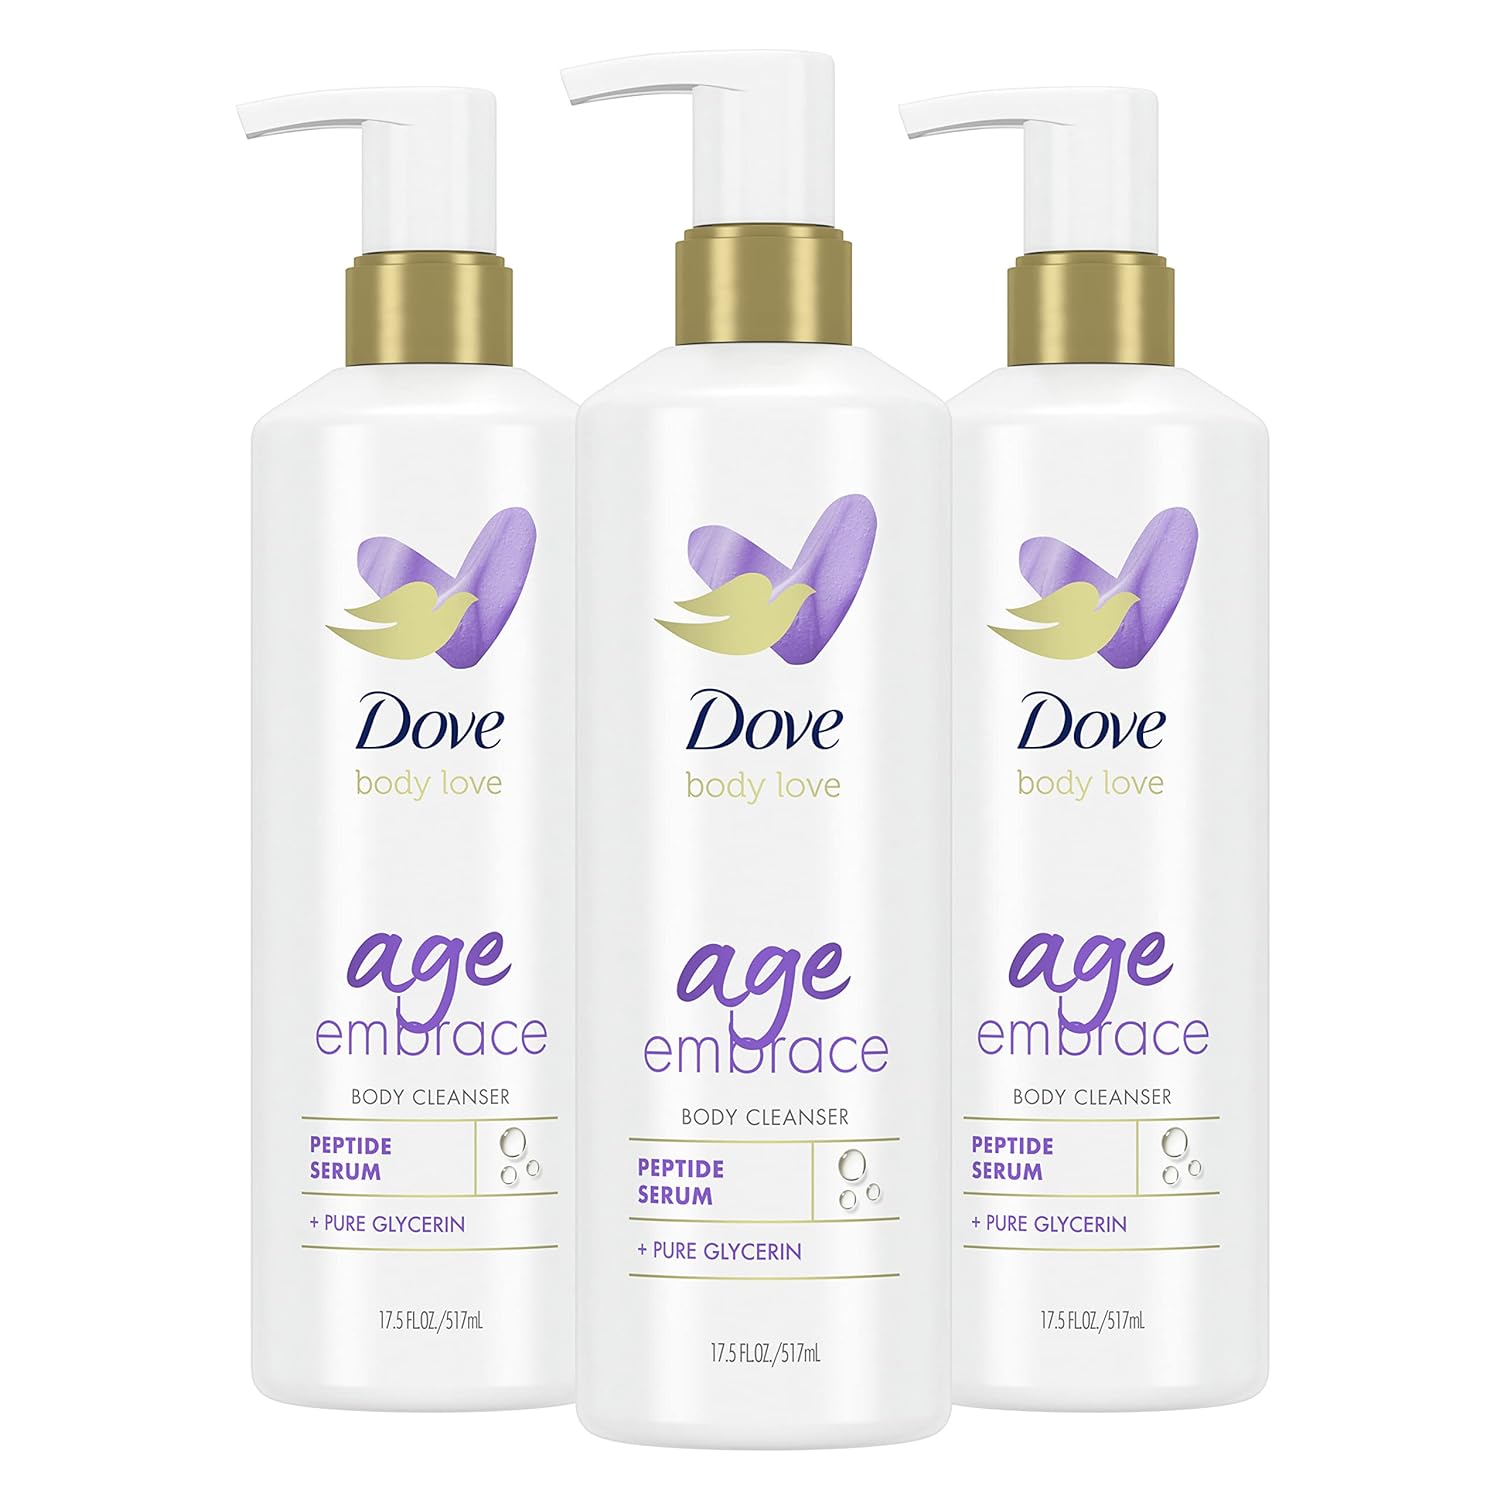 Amazon Business Accounts: 3-Pack 17.5-Oz Dove Body Love Moisture Boost Body Cleanser $7.10 ($2.35 each) w/ S&S & More + Free Shipping w/ Prime or $35+